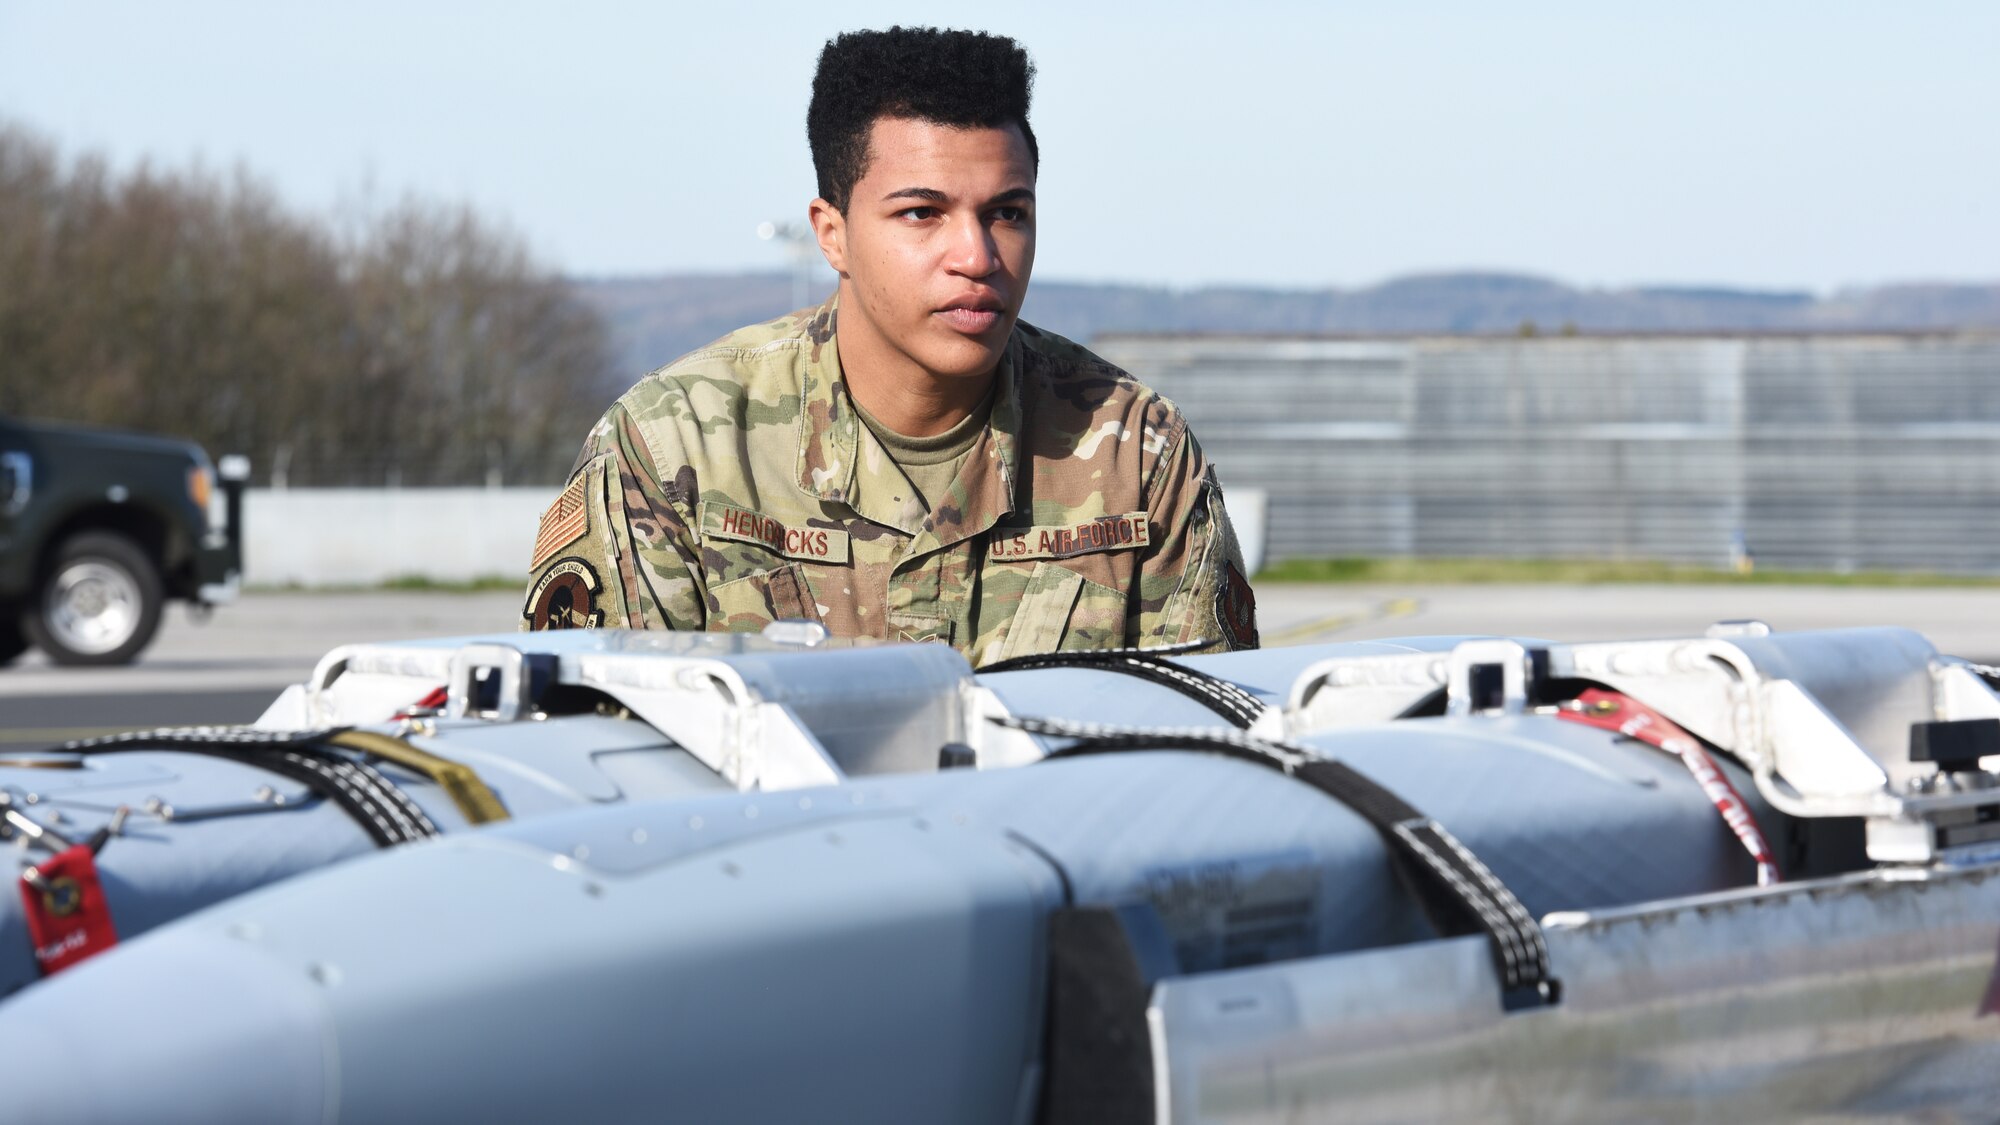 U.S. Air Force Staff Sgt. Winston Hendricks, 52nd Maintenance Squadron Precision Guided Munitions Crew Chief, assists with prepping a number of munitions for a U.S. Air Force F-16 Fighting Falcon during an exercise at Spangdahlem Air Base, Germany, April 27, 2021. In all, Airmen would load one AGM-158 Joint Air to Surface Standoff Missile and two ADM-160C Miniature Air Launched Decoy missiles. (U.S. Air Force photo by Tech. Sgt. Tony Plyler)